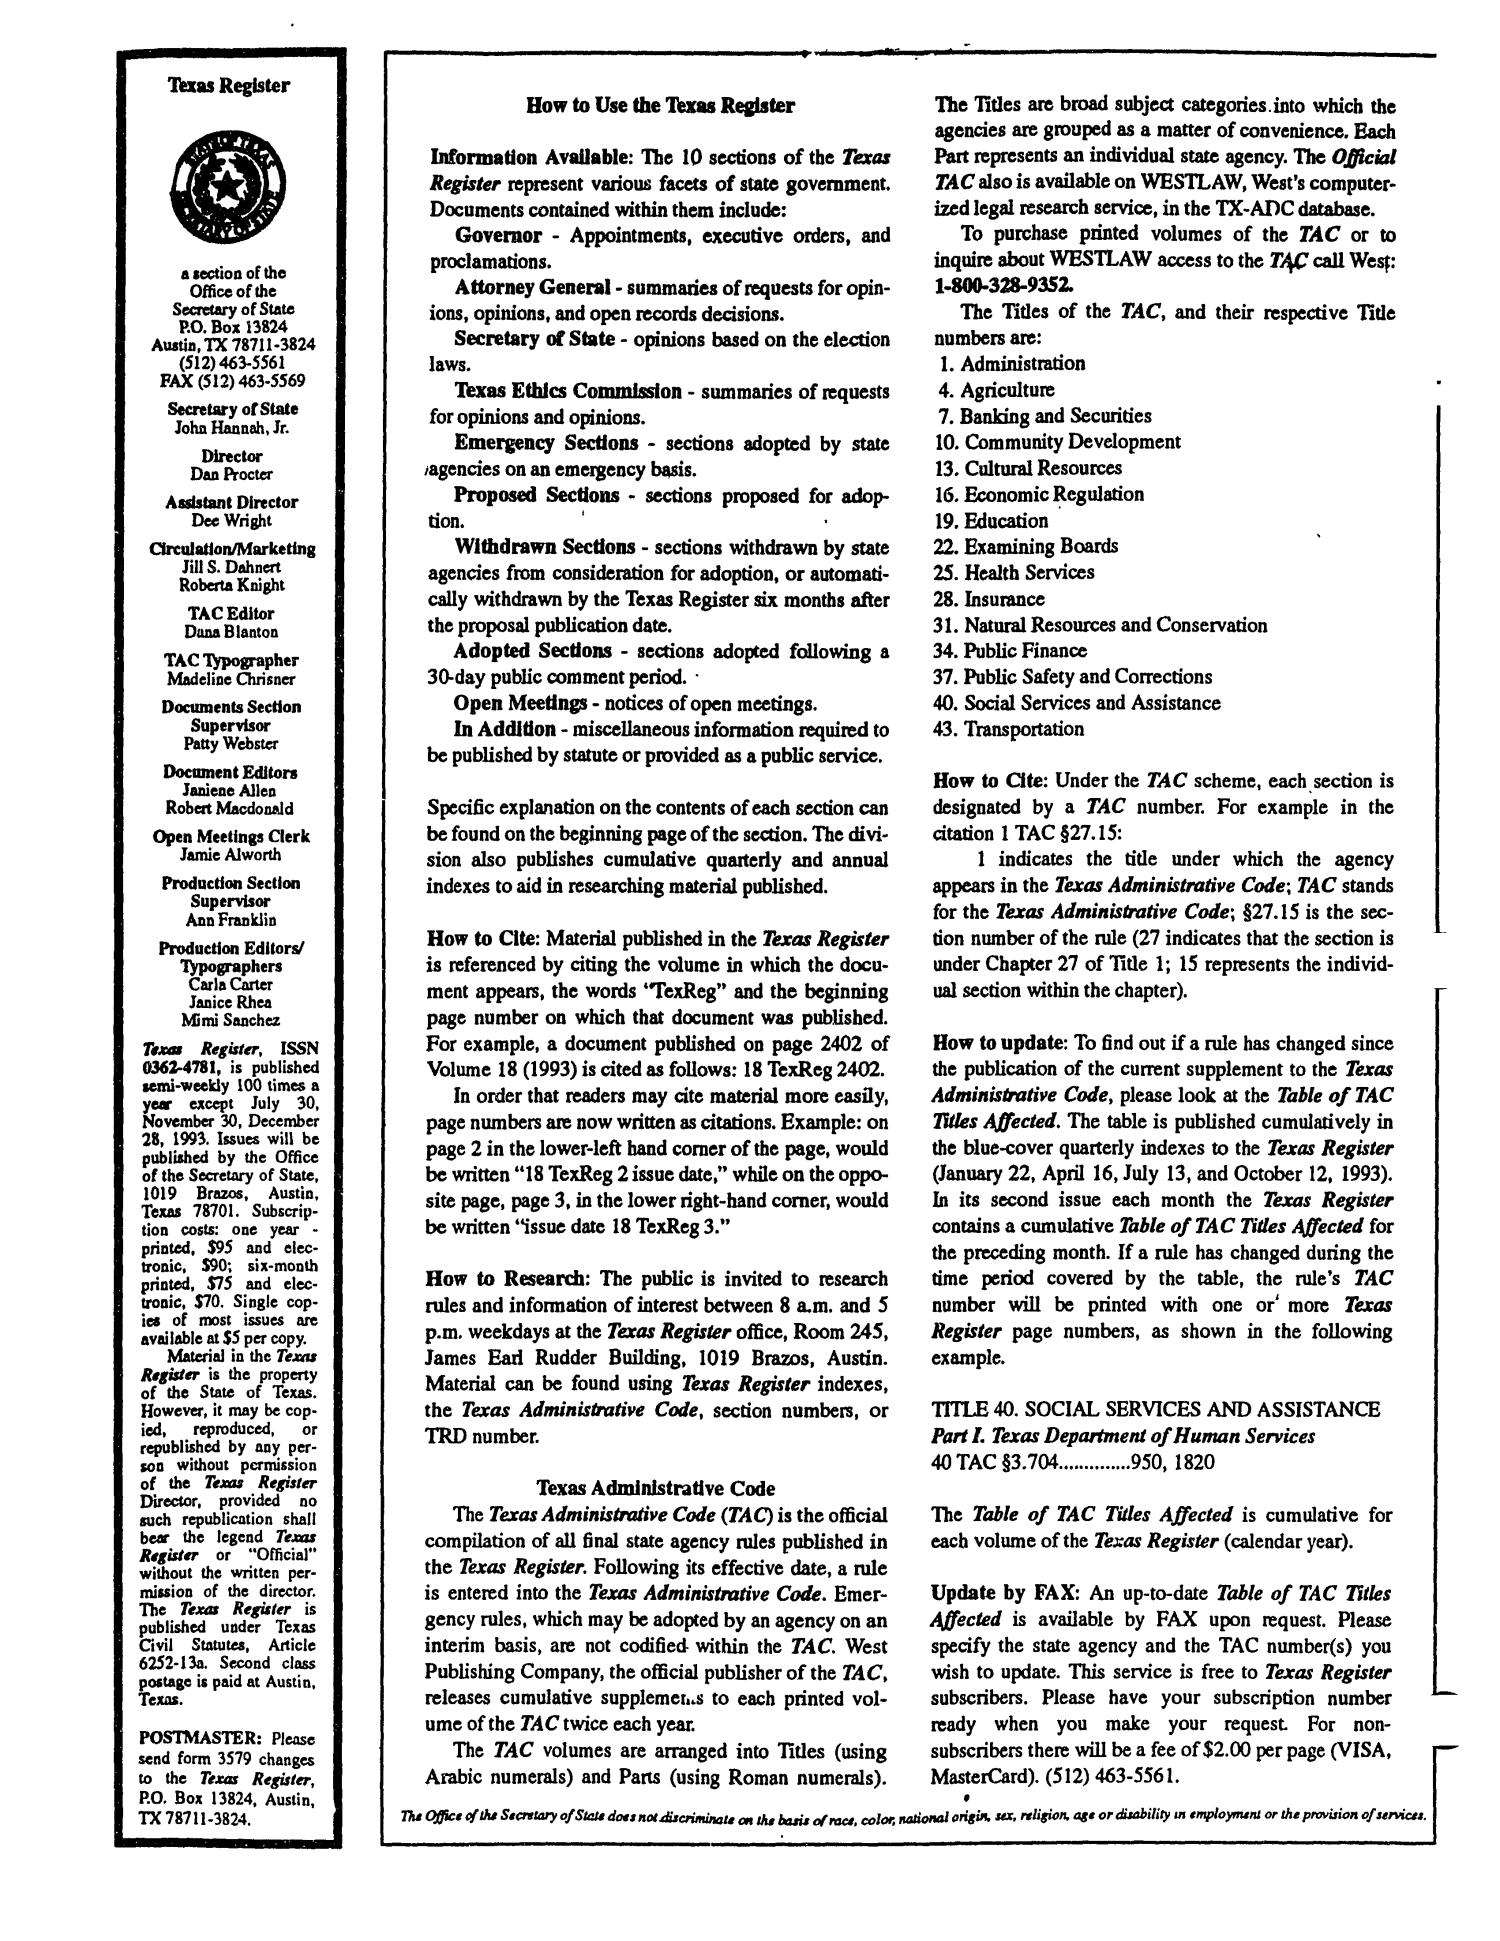 Texas Register, Volume 18, Number 51, Pages 4253-4356, July 2, 1993
                                                
                                                    None
                                                